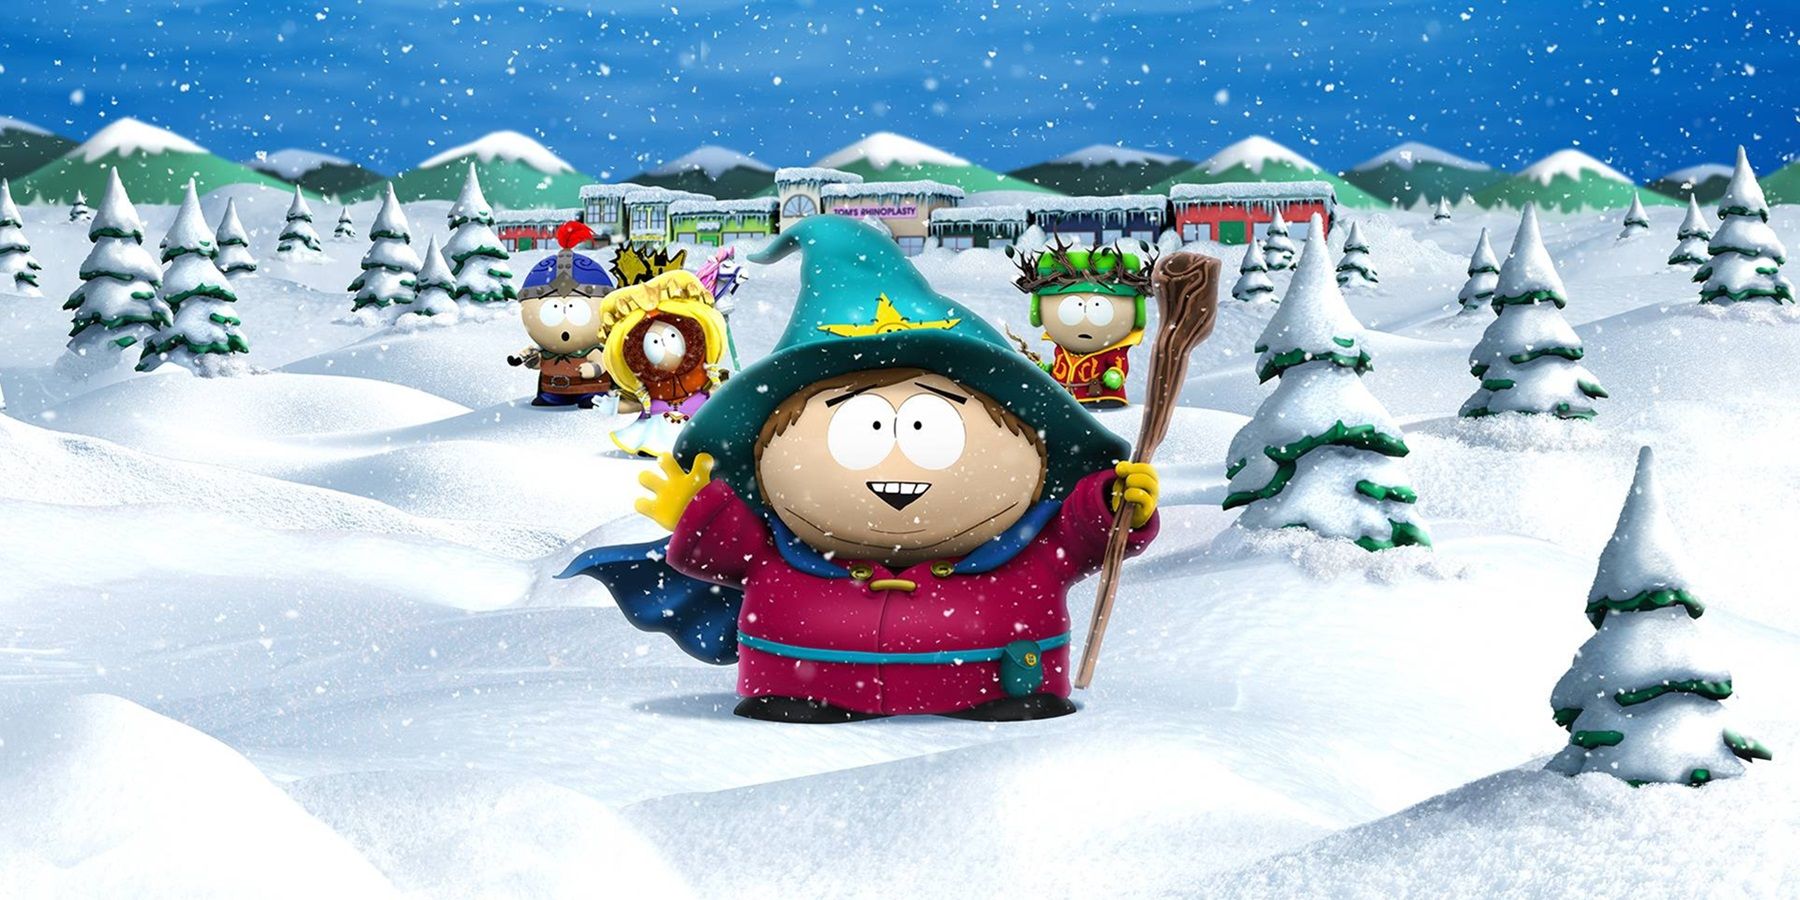 south park characters in the snow